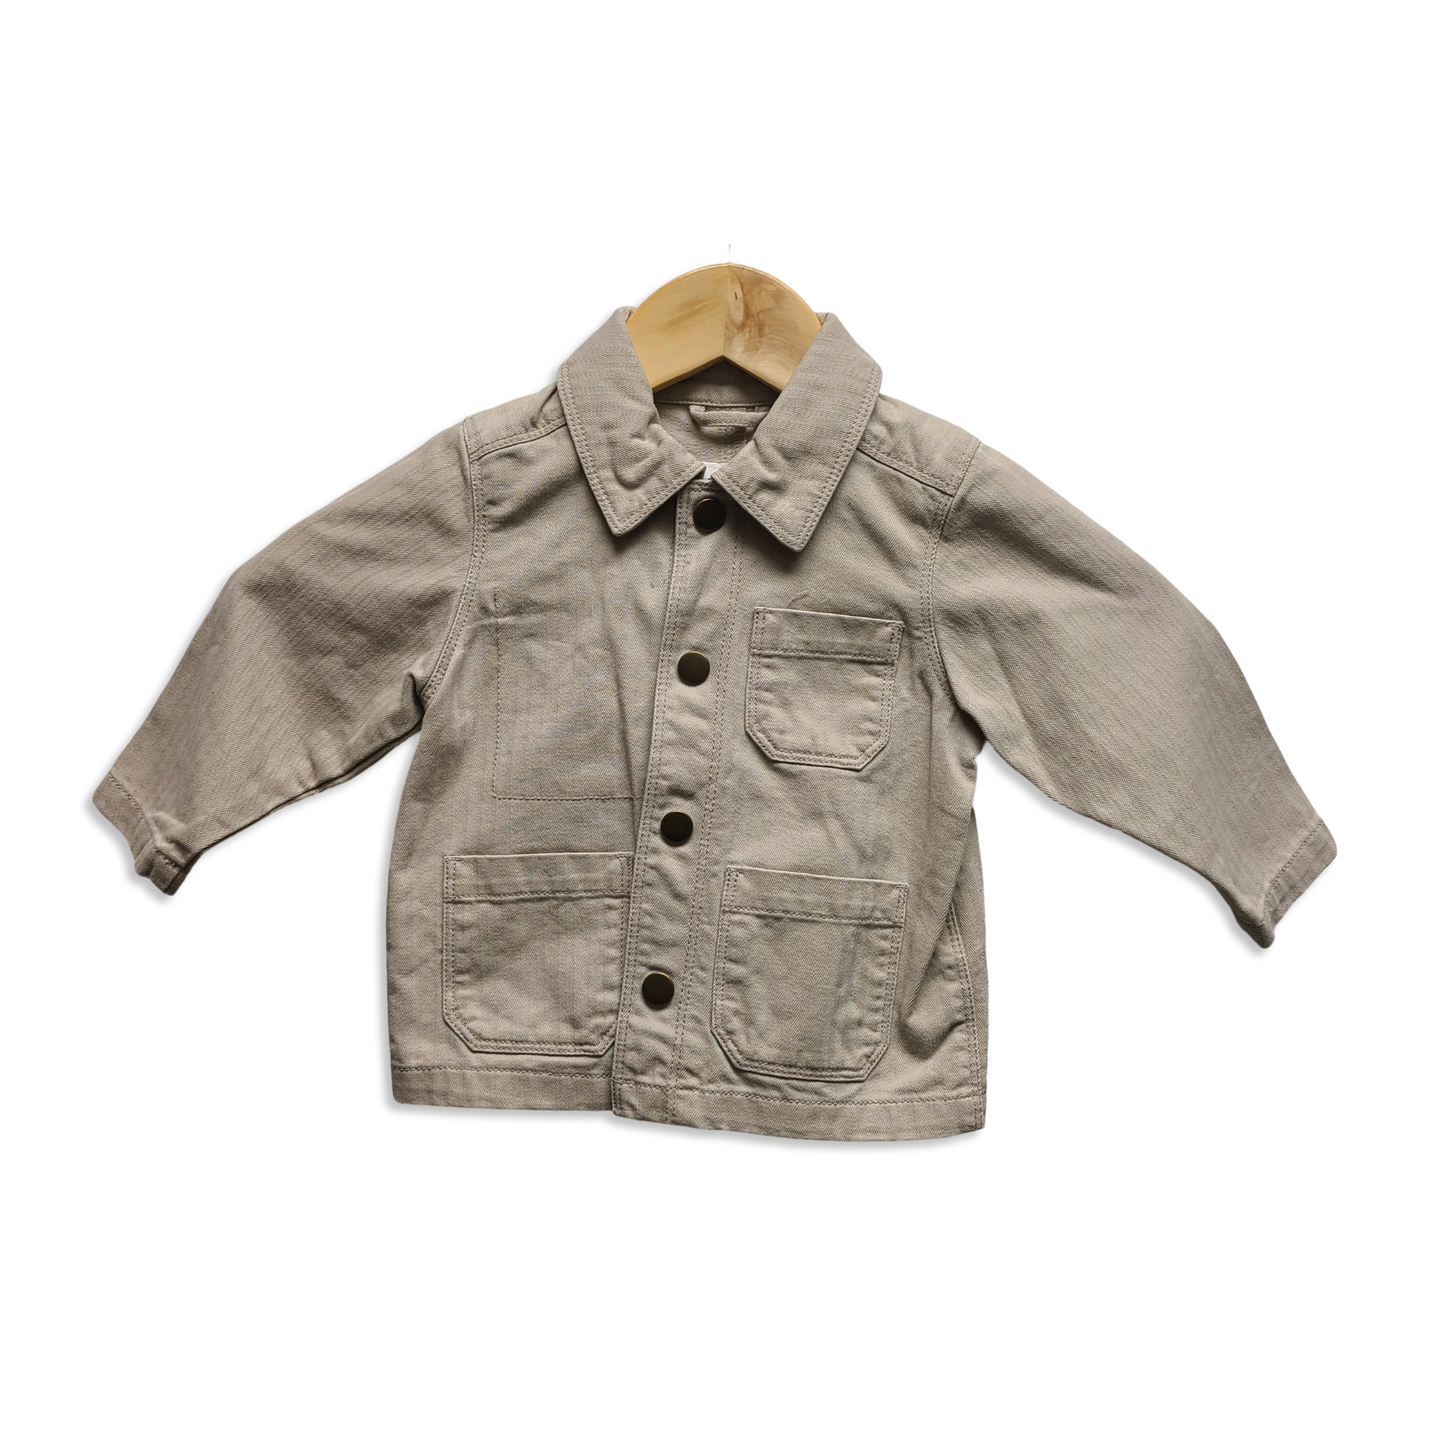 Old Navy - Light Jacket 12-18 Months - March 21 Drop